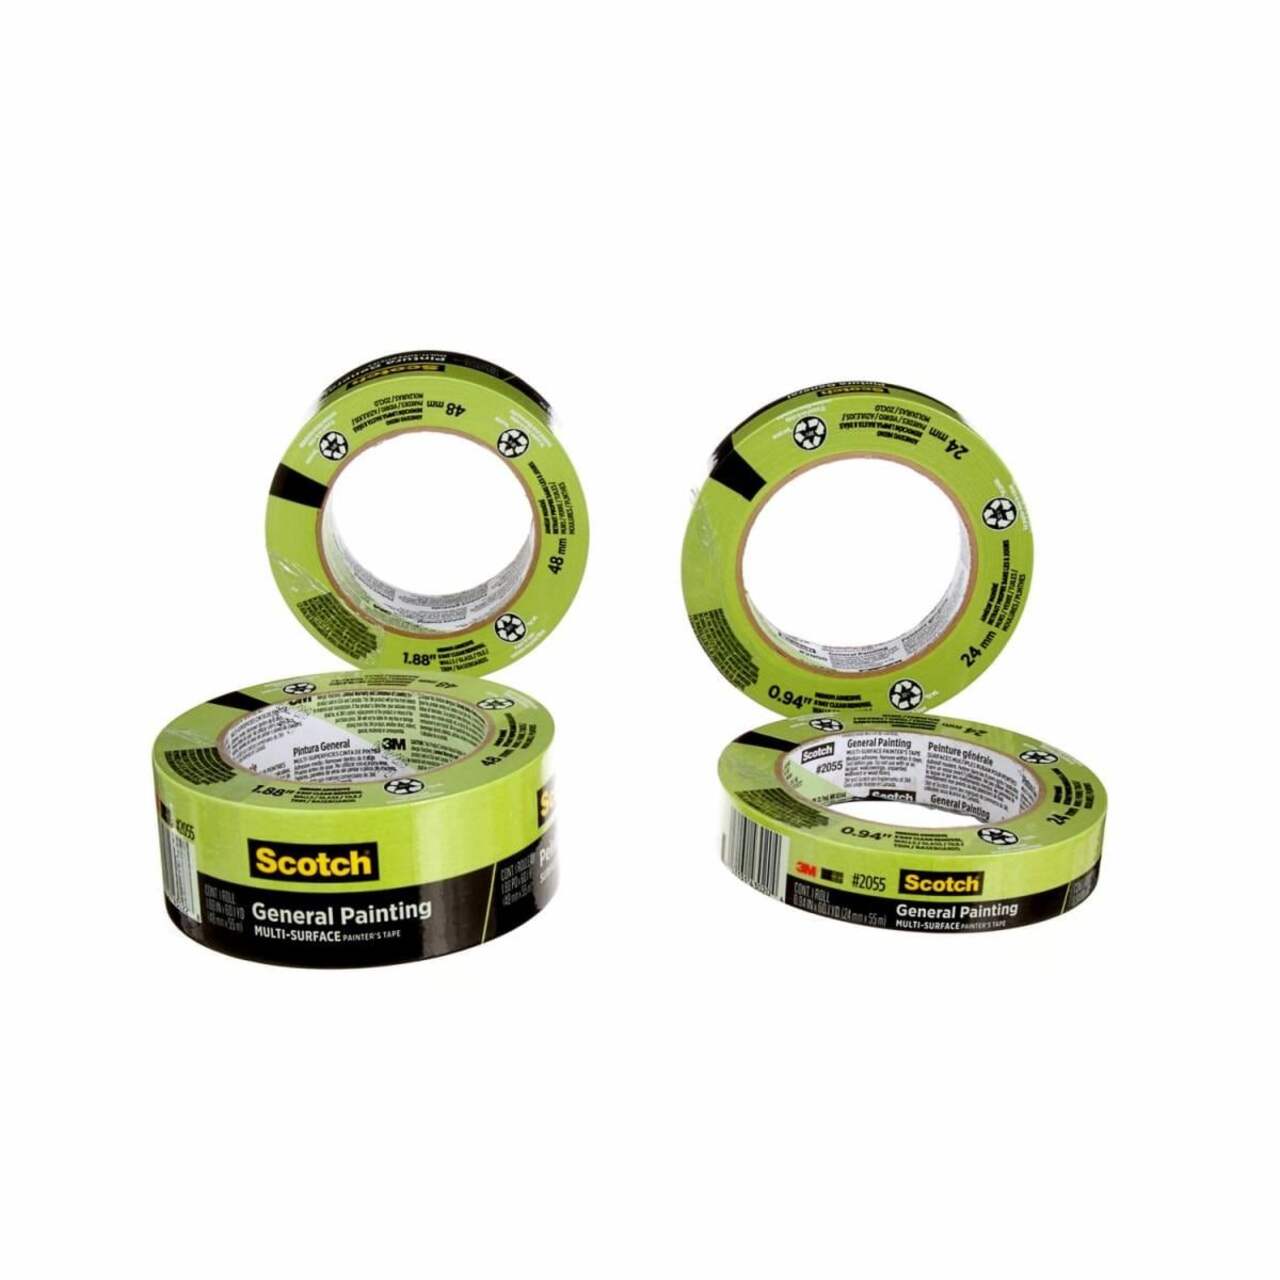 3M Scotch General Painting Multi-Surface Painter's Tape, UV-Resistant,  Green, 1.88-in x 60-yd